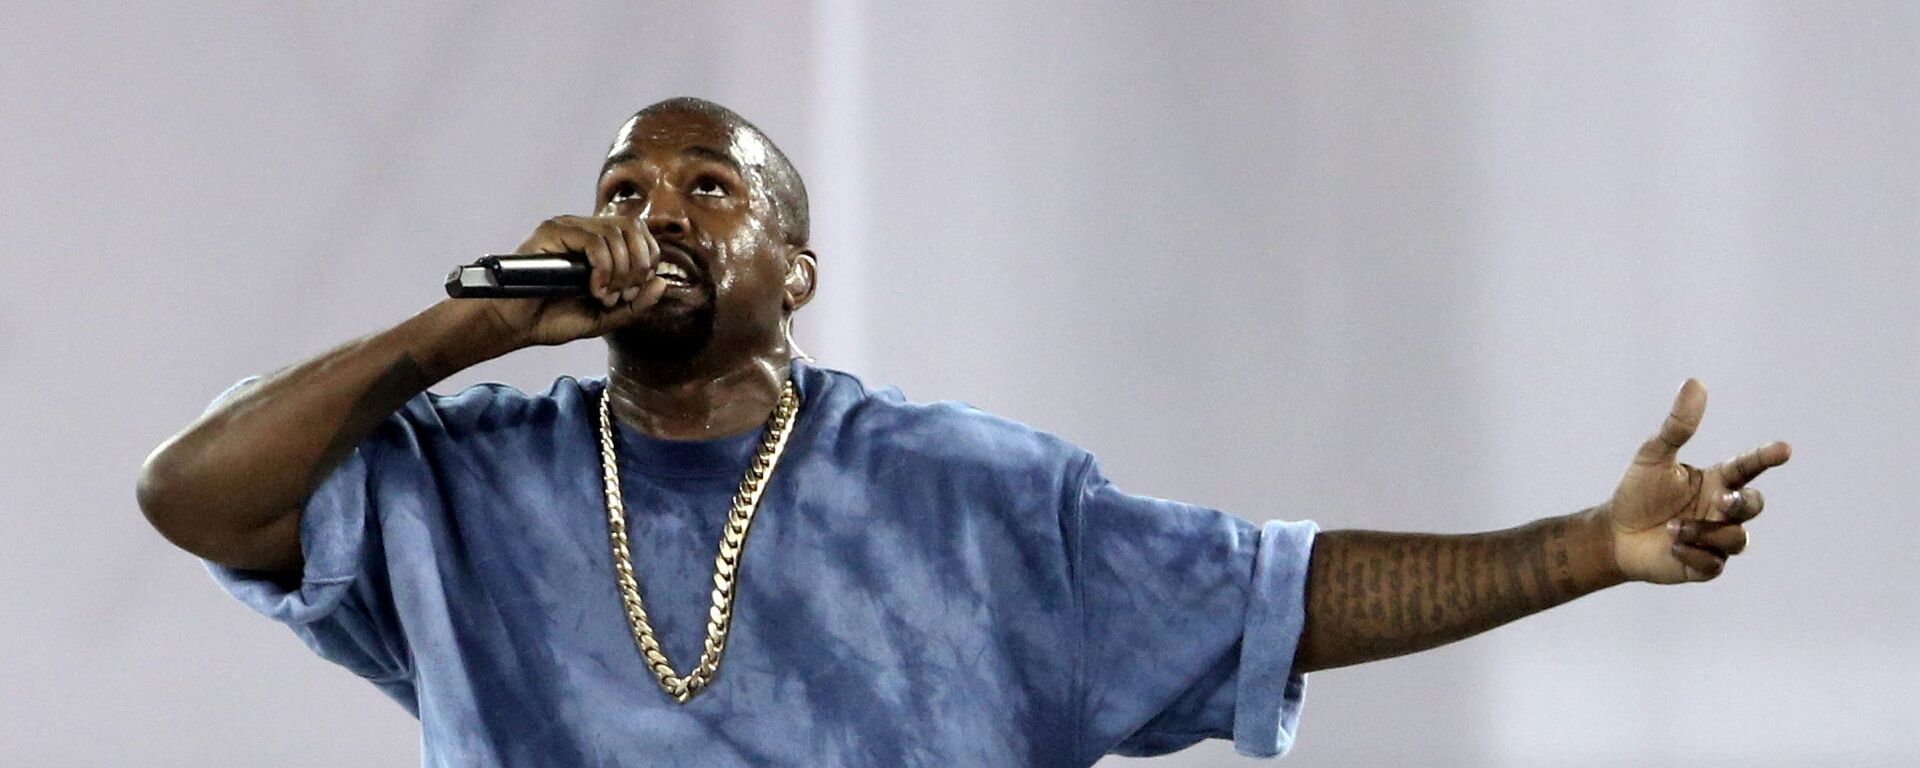 FILE PHOTO: Recording artist Kanye West performs during the closing ceremony for the 2015 Pan Am Games at Pan Am Ceremonies Venue in Toronto, Canada, July 26, 2015.  - Sputnik International, 1920, 13.11.2021